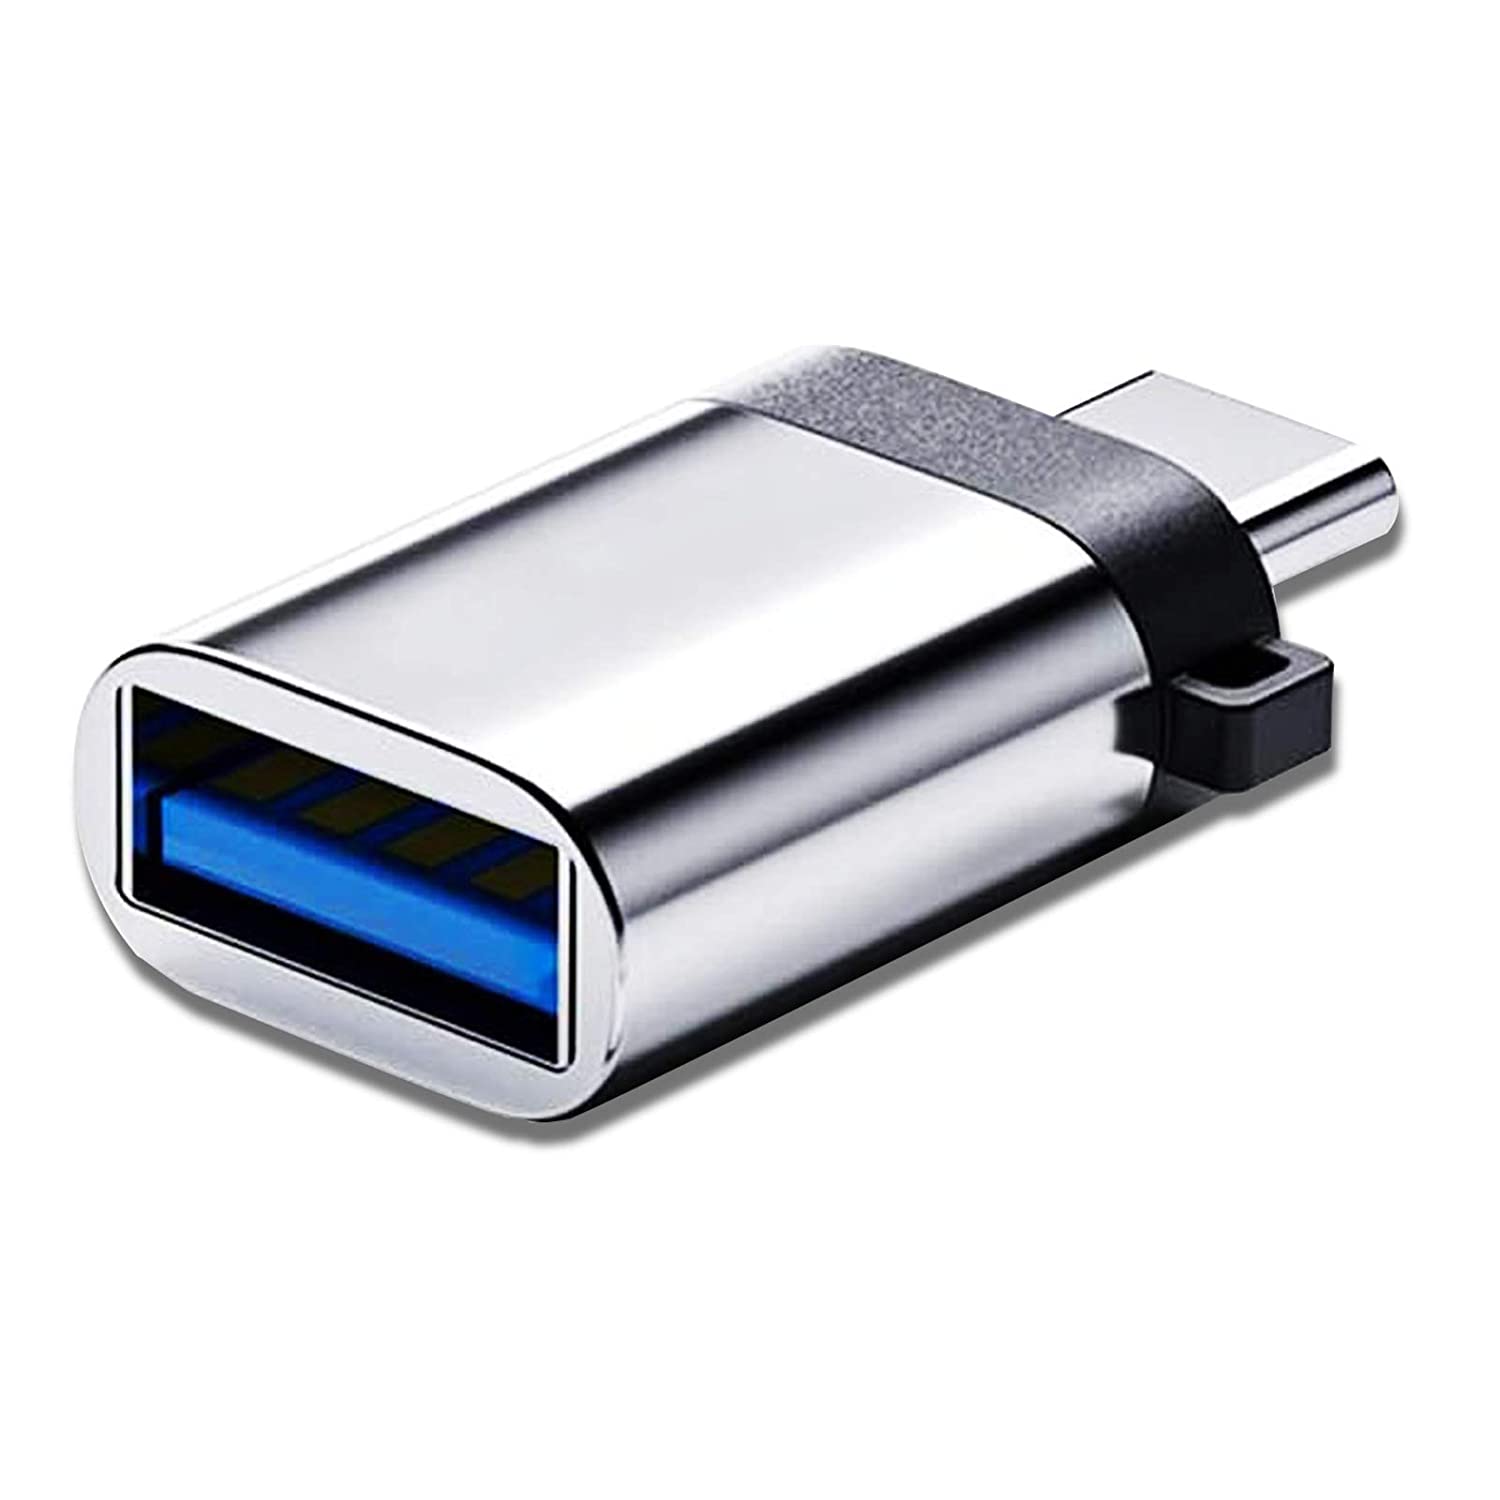 A silver USB-C to USB-A adapter